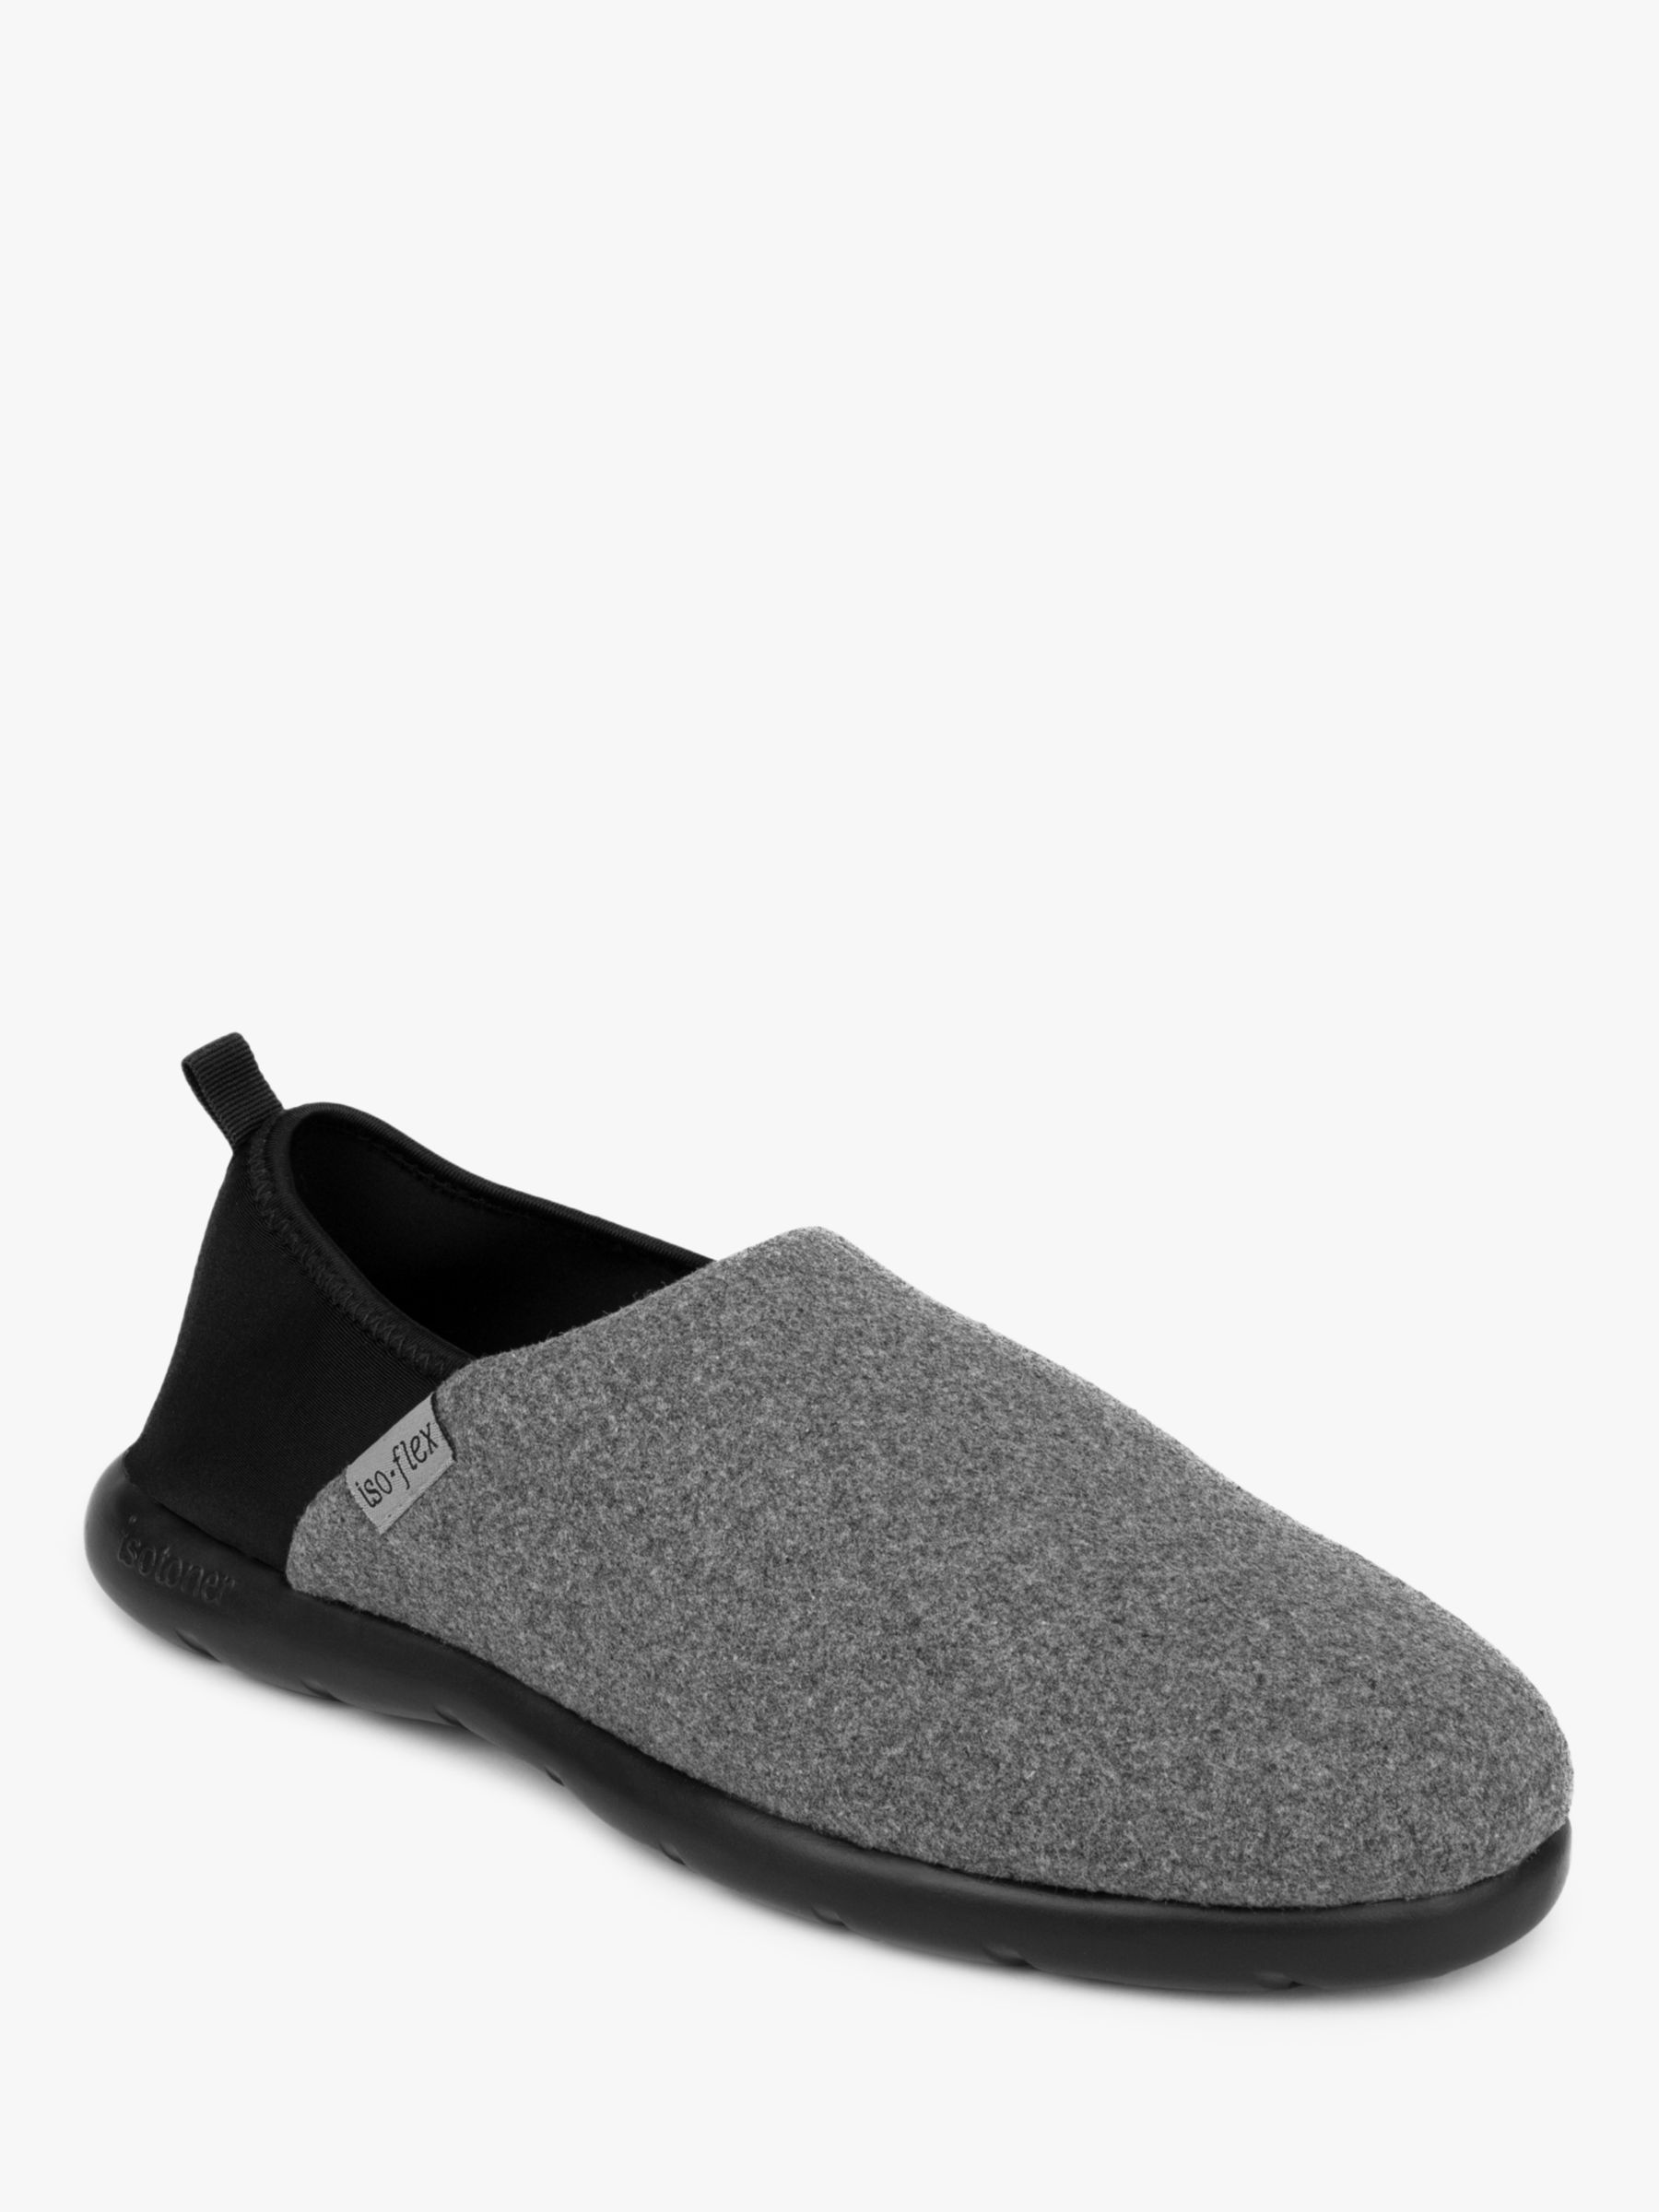 totes Iso Flex Textured Colour Block Mule Slippers, Grey/Black, 8